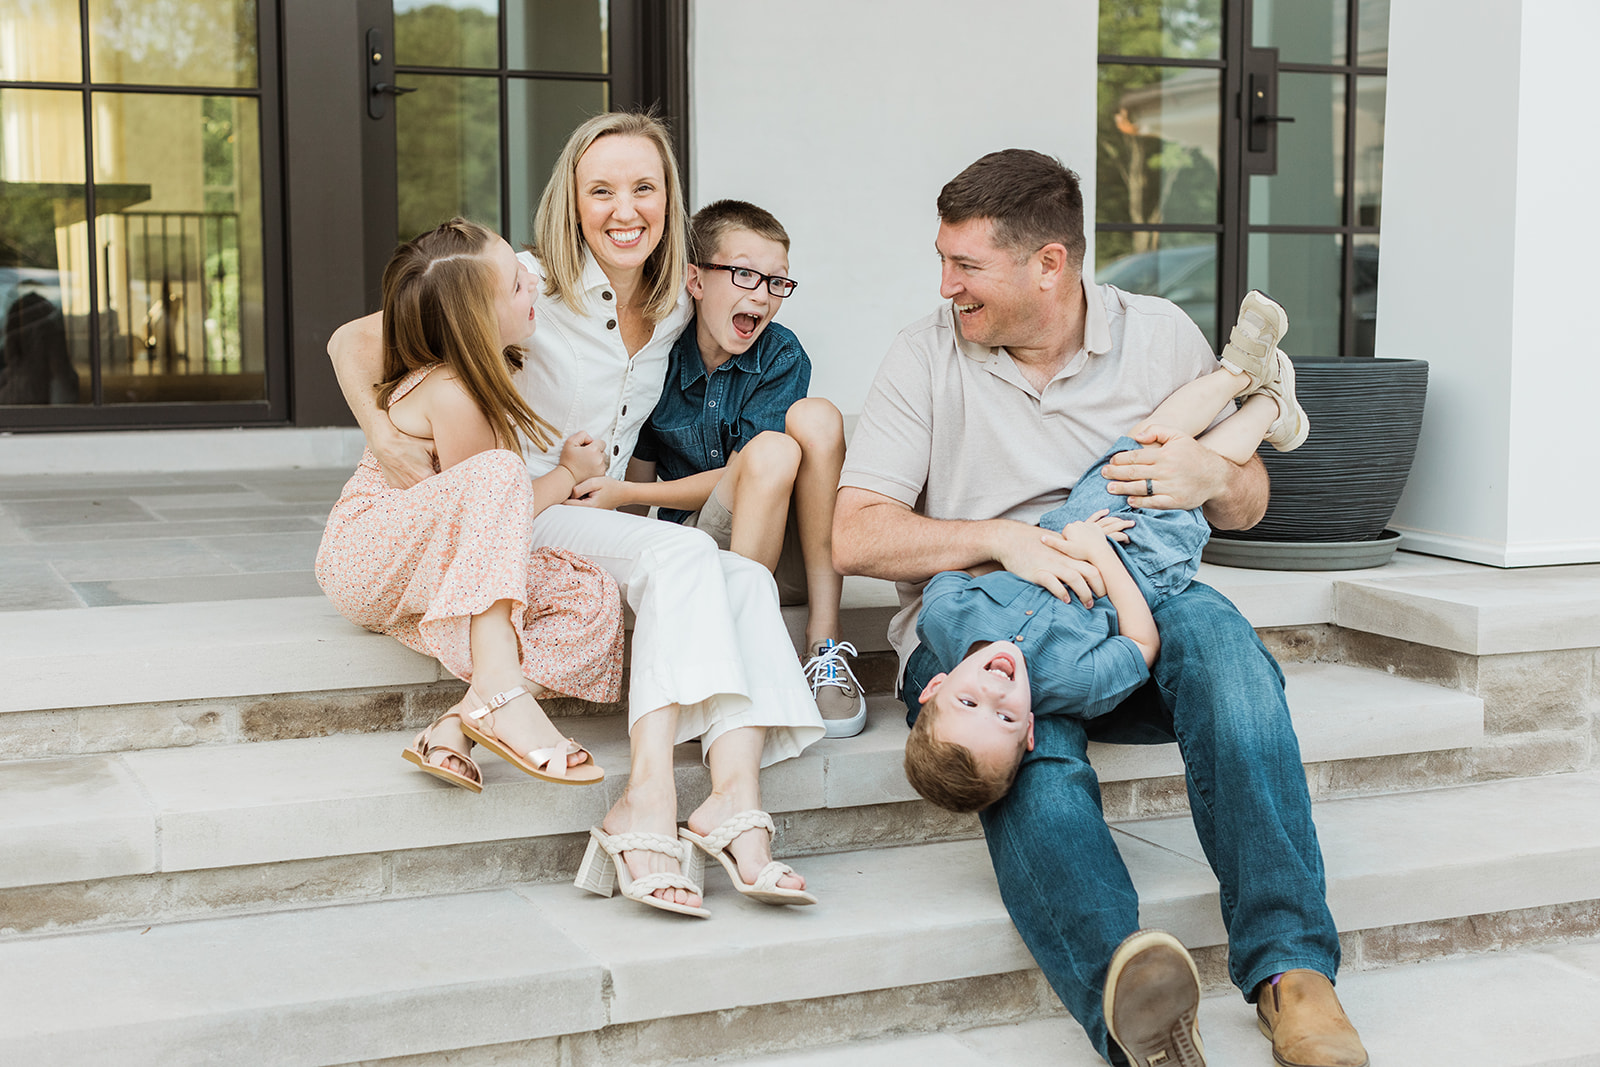 outdoor in-home family session in nashville tennessee. family of 5